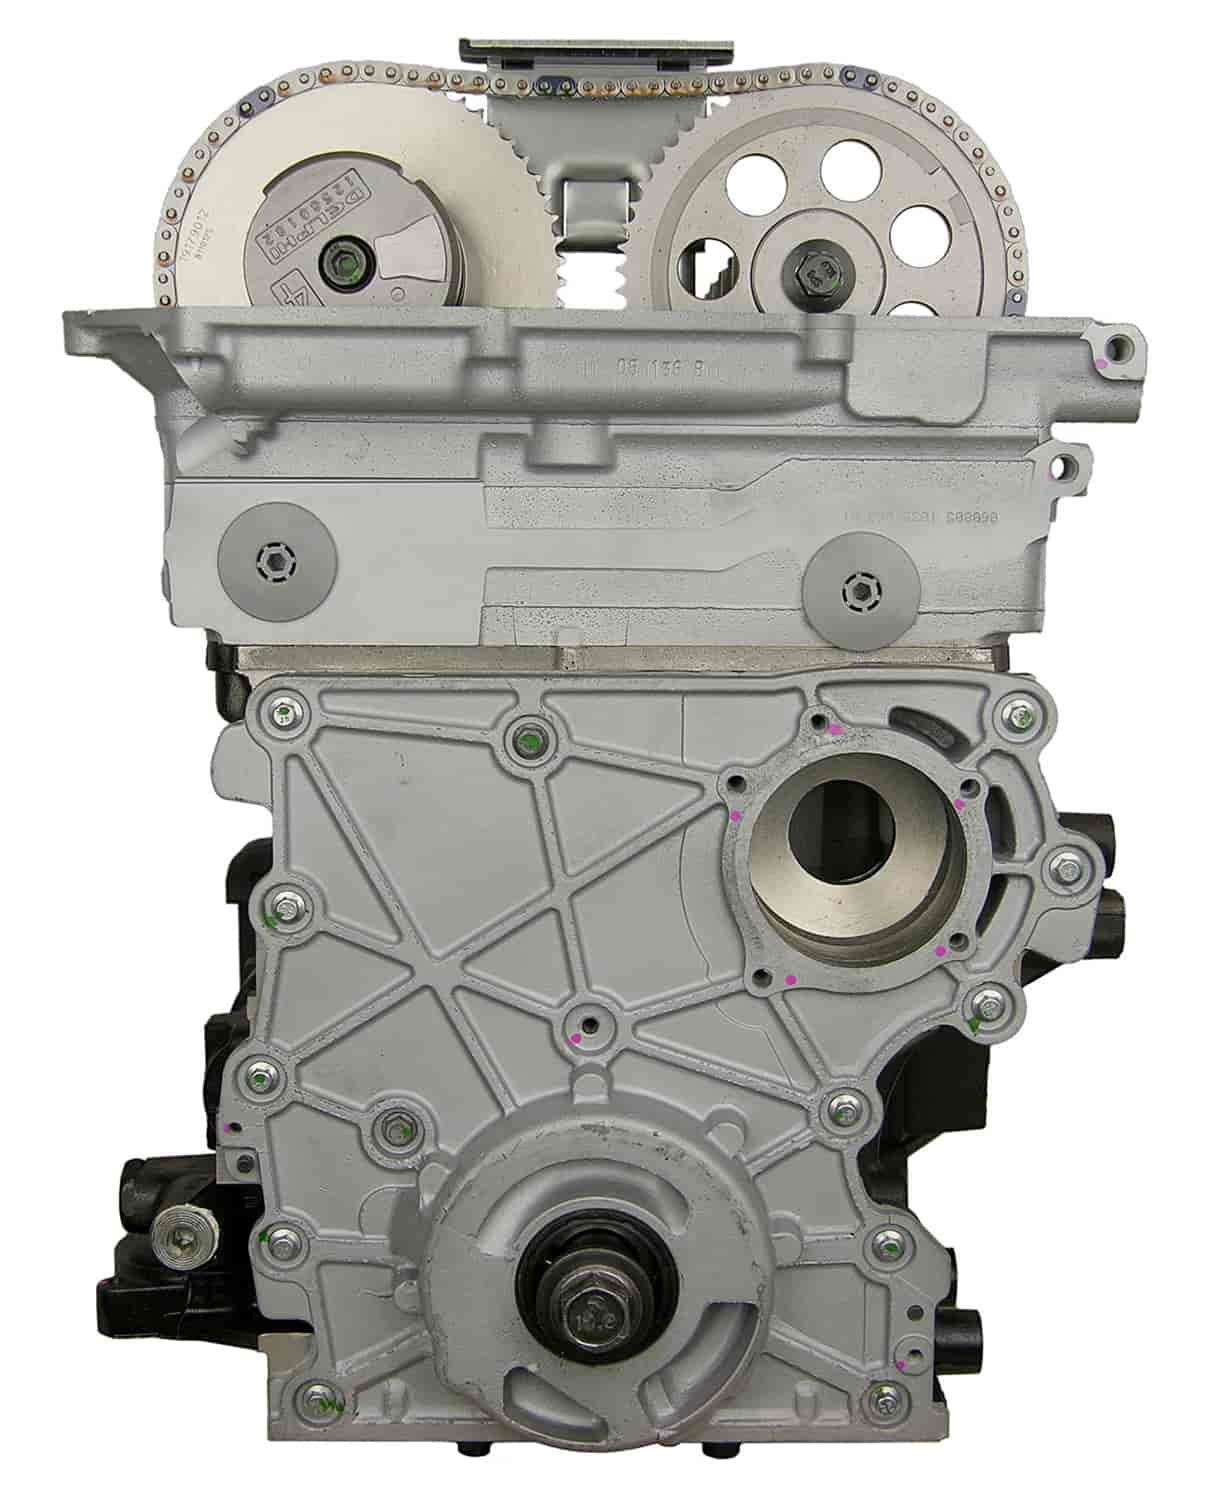 Remanufactured Crate Engine for 2004-2005 Chevy Colorado & GMC Canyon with 2.8L L4